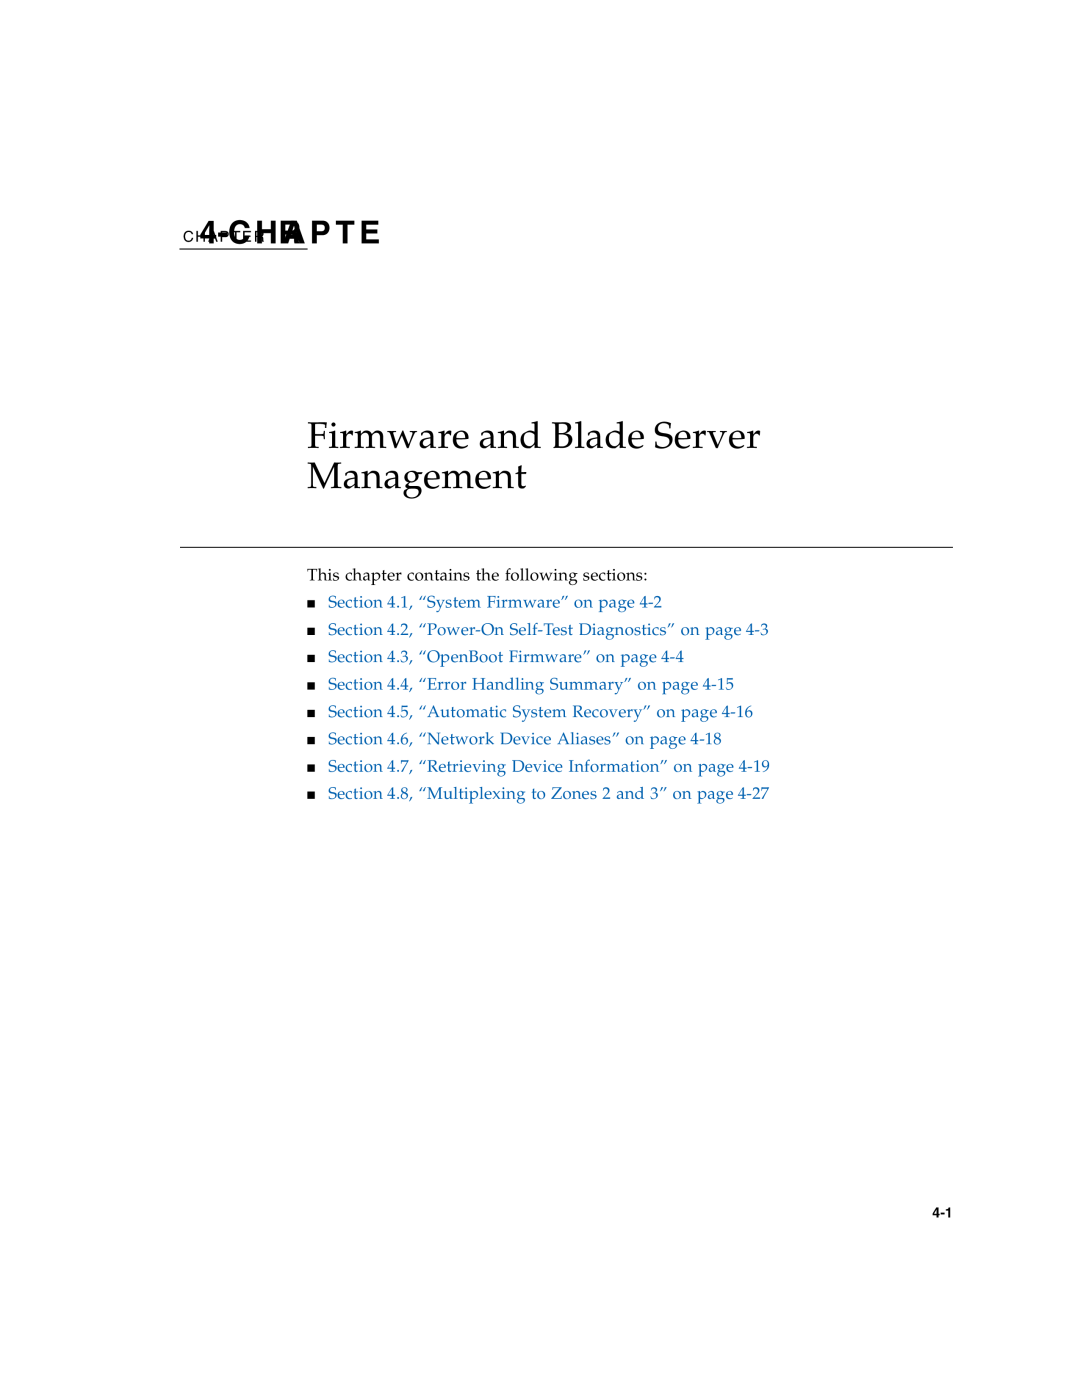 Sun Microsystems CP3260 manual Firmware and Blade Server Management, C H4A-PCT E RHRA P T E, 1, “System Firmware” on page 